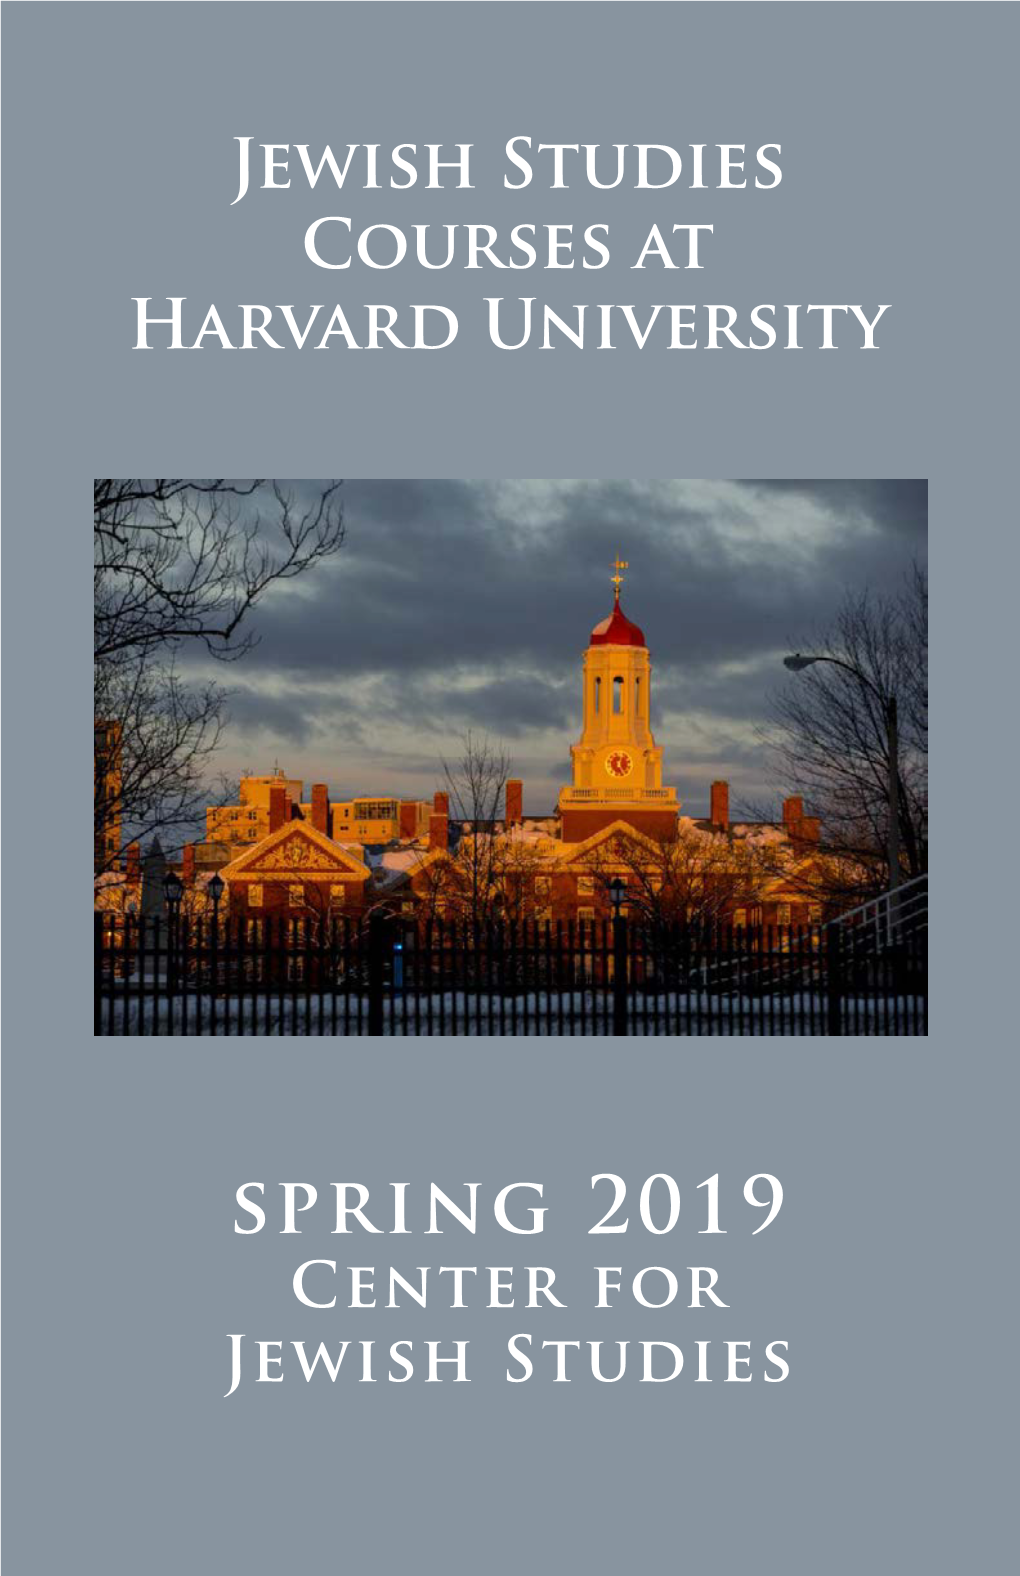 Spring 2019 Center for Jewish Studies This Publication Is for Informational Purposes Only